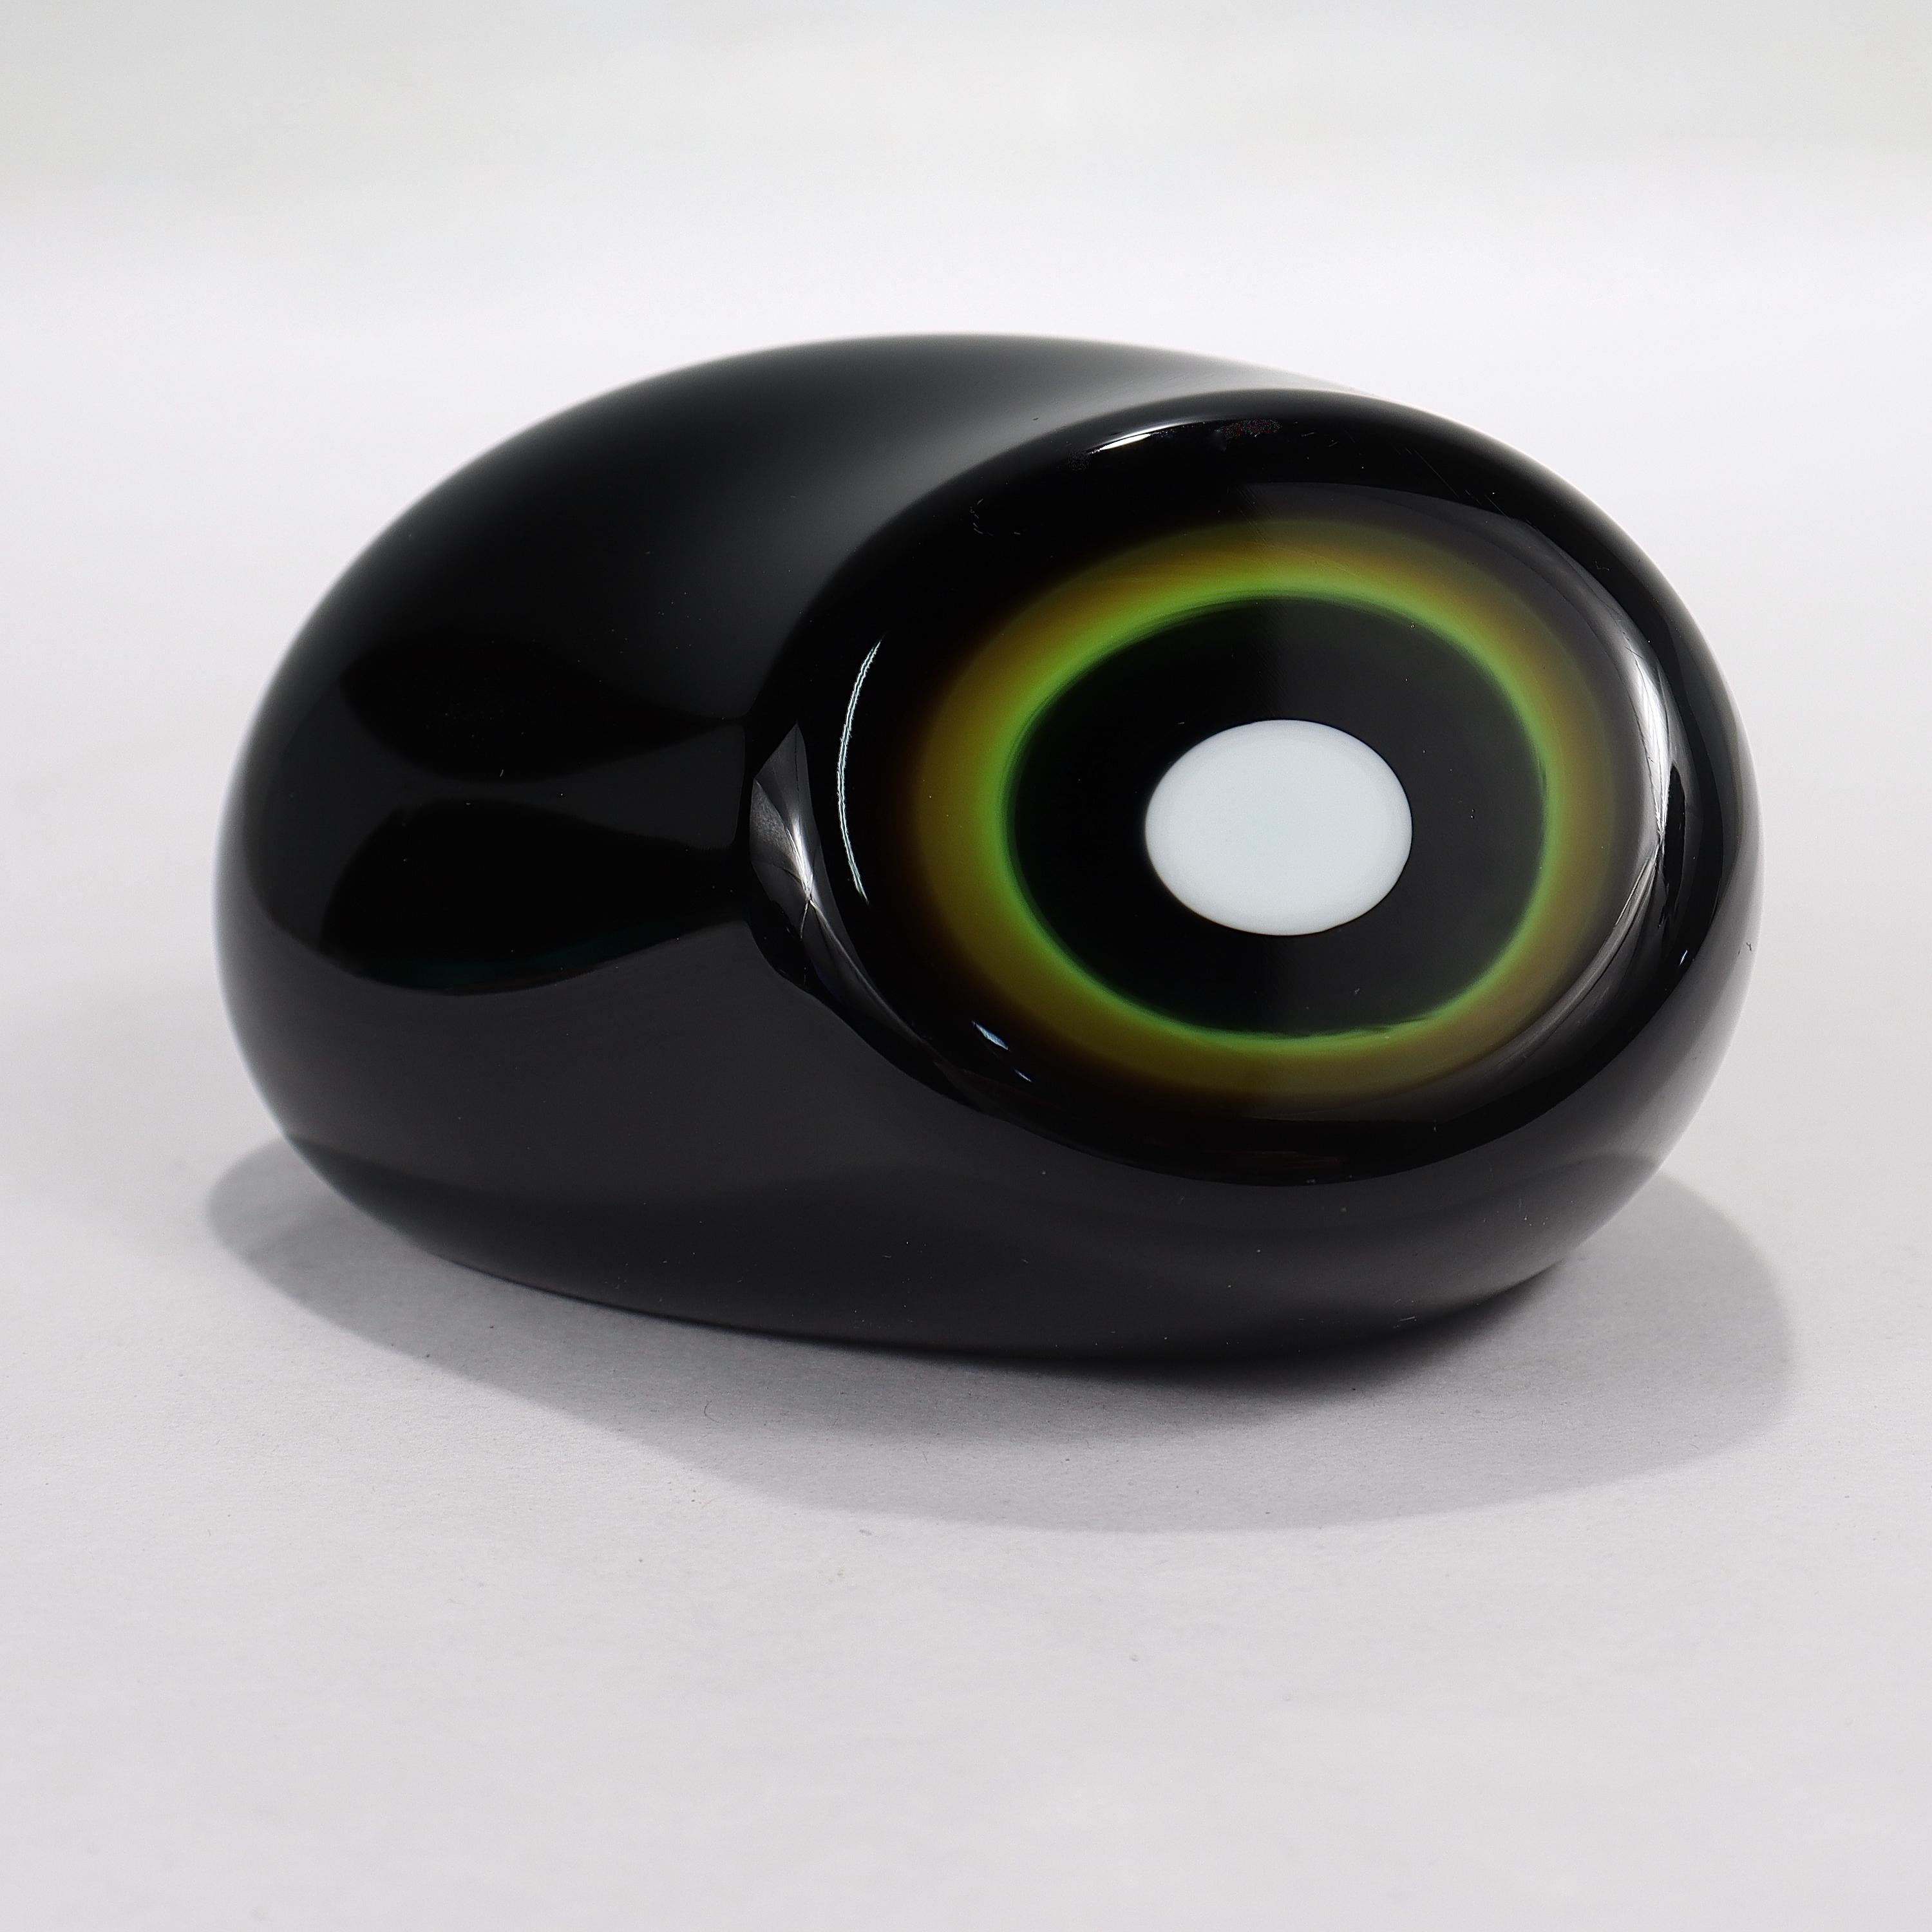 A fine Murano glass paperweight.

By Vistosi.

In the form of a black (or deep amethsyt) ameoba shape with a green & white bullseye pattern.

Simply a great Italian glass paperweight! 

Date:
1960s - 70s

Overall Condition:
It is in